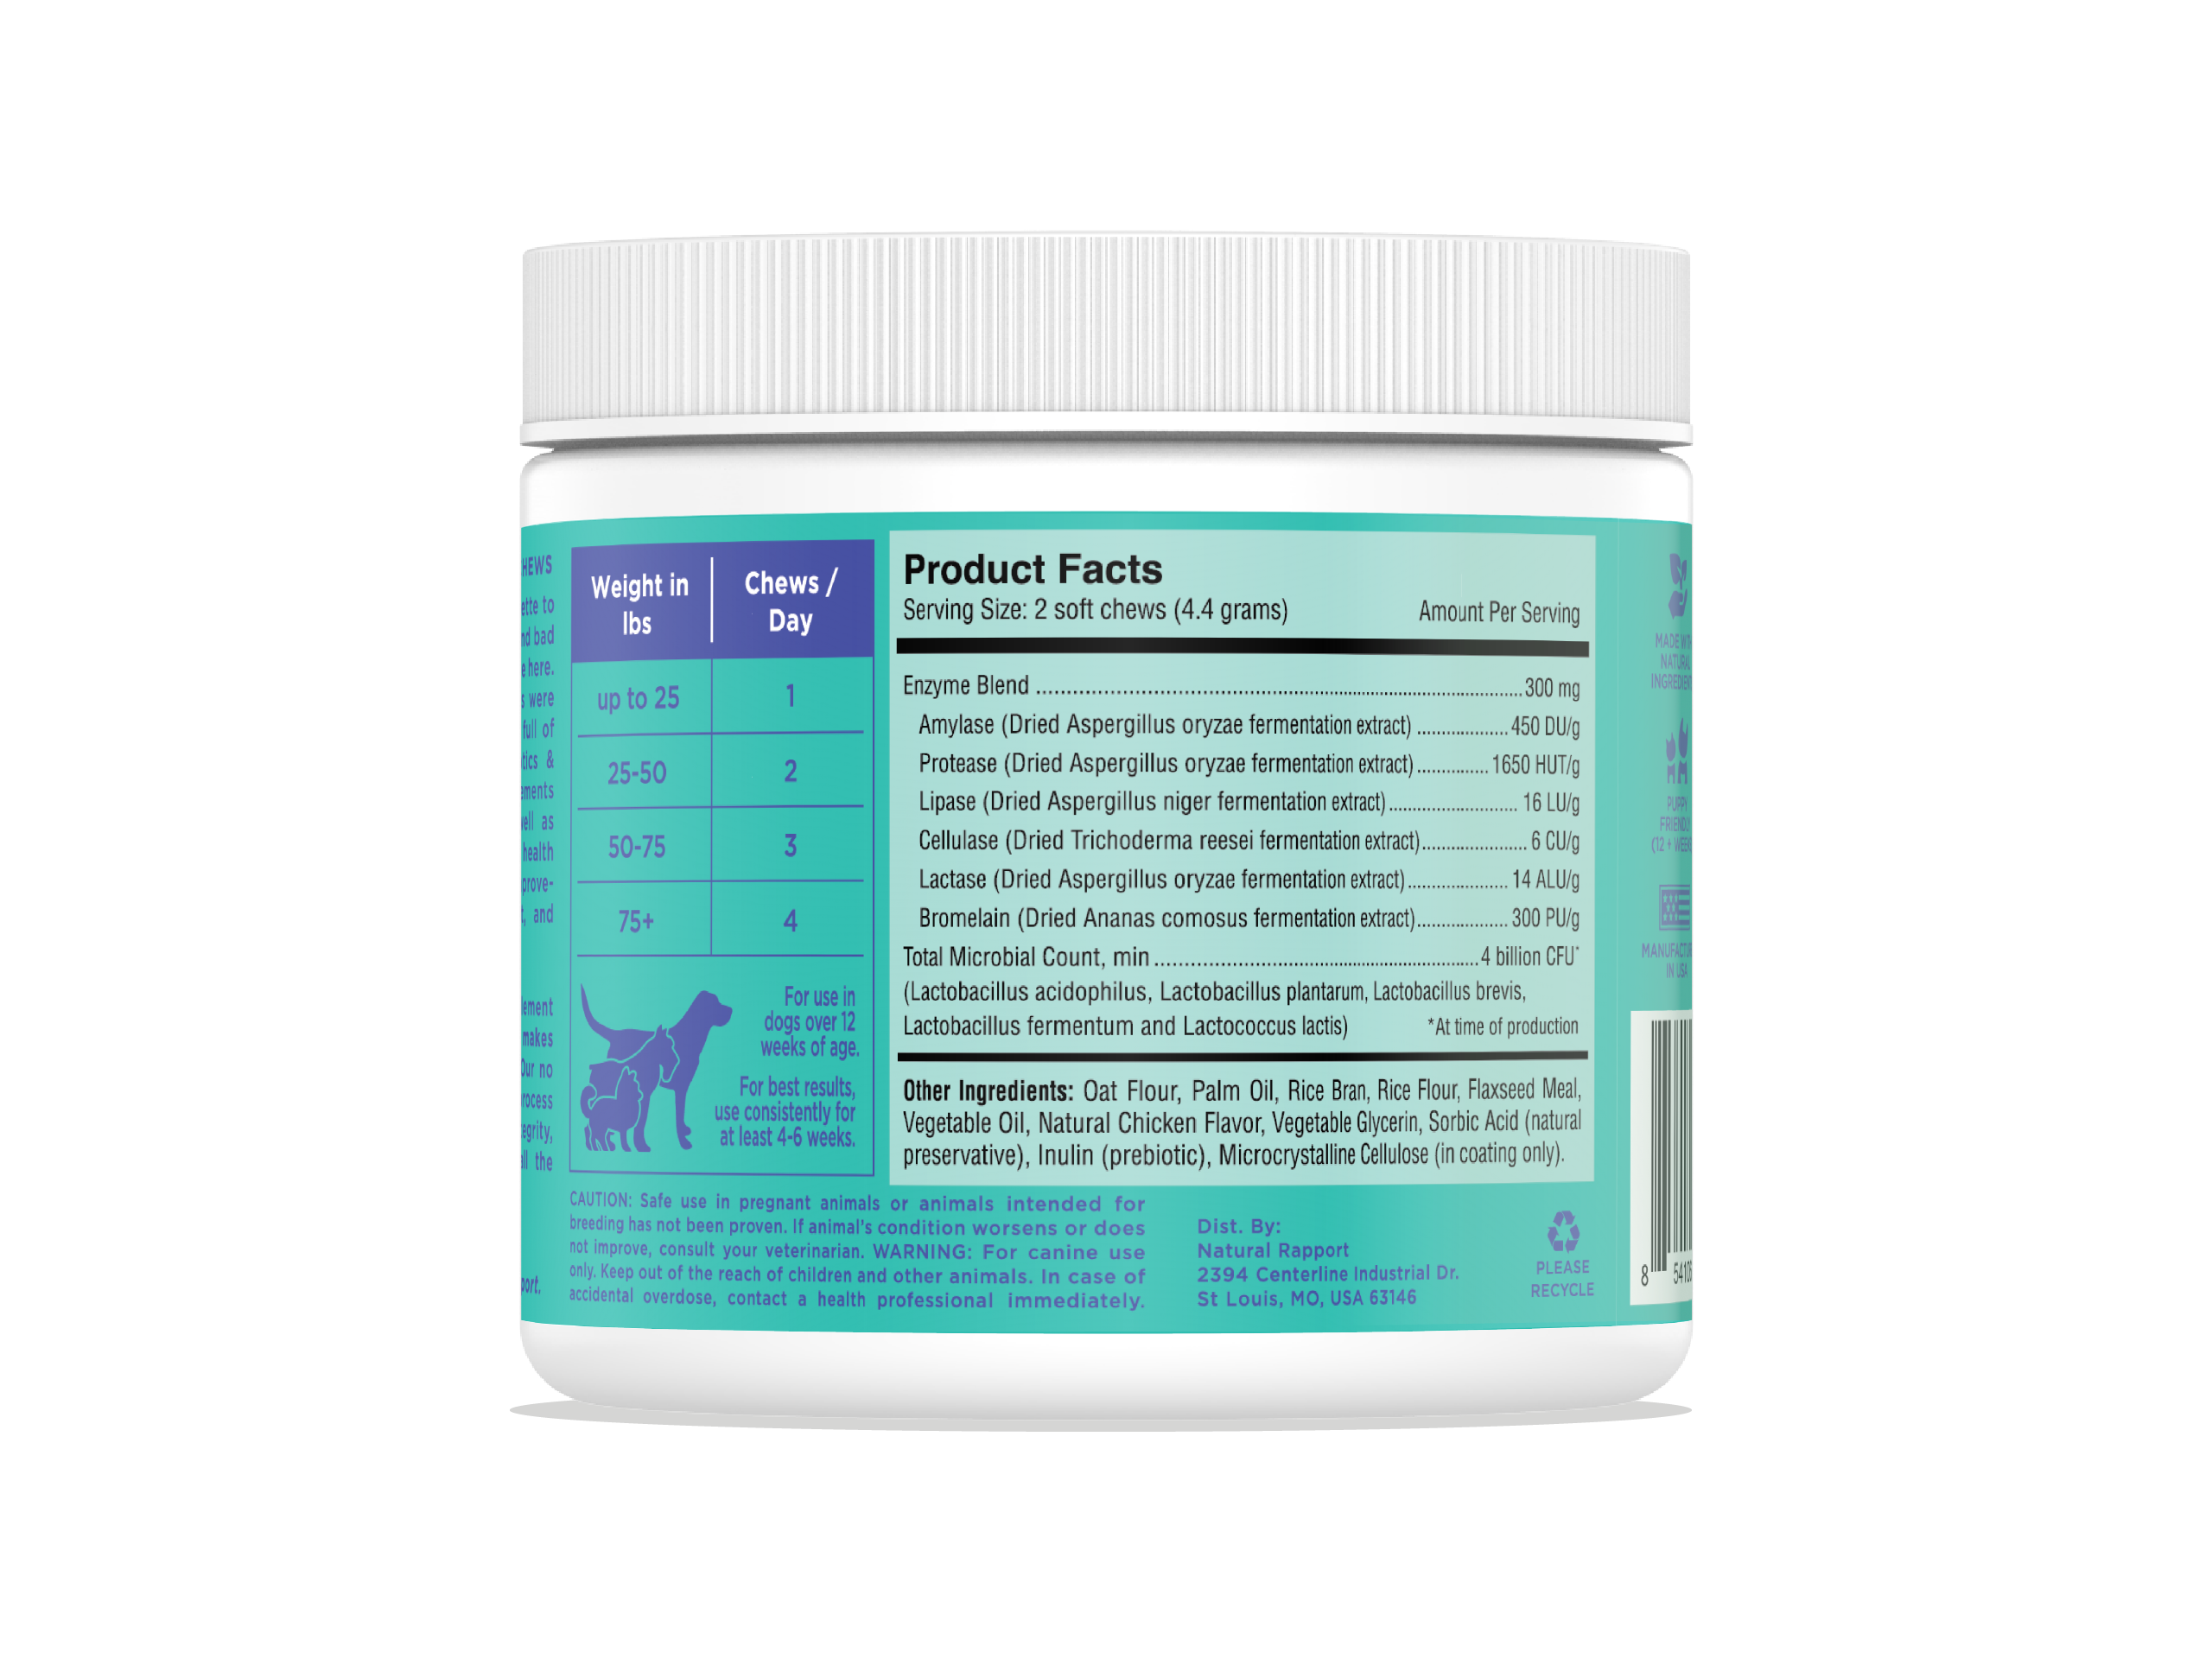 Natural Rapport - The Only Digestive Support Soft Chews Dogs Need